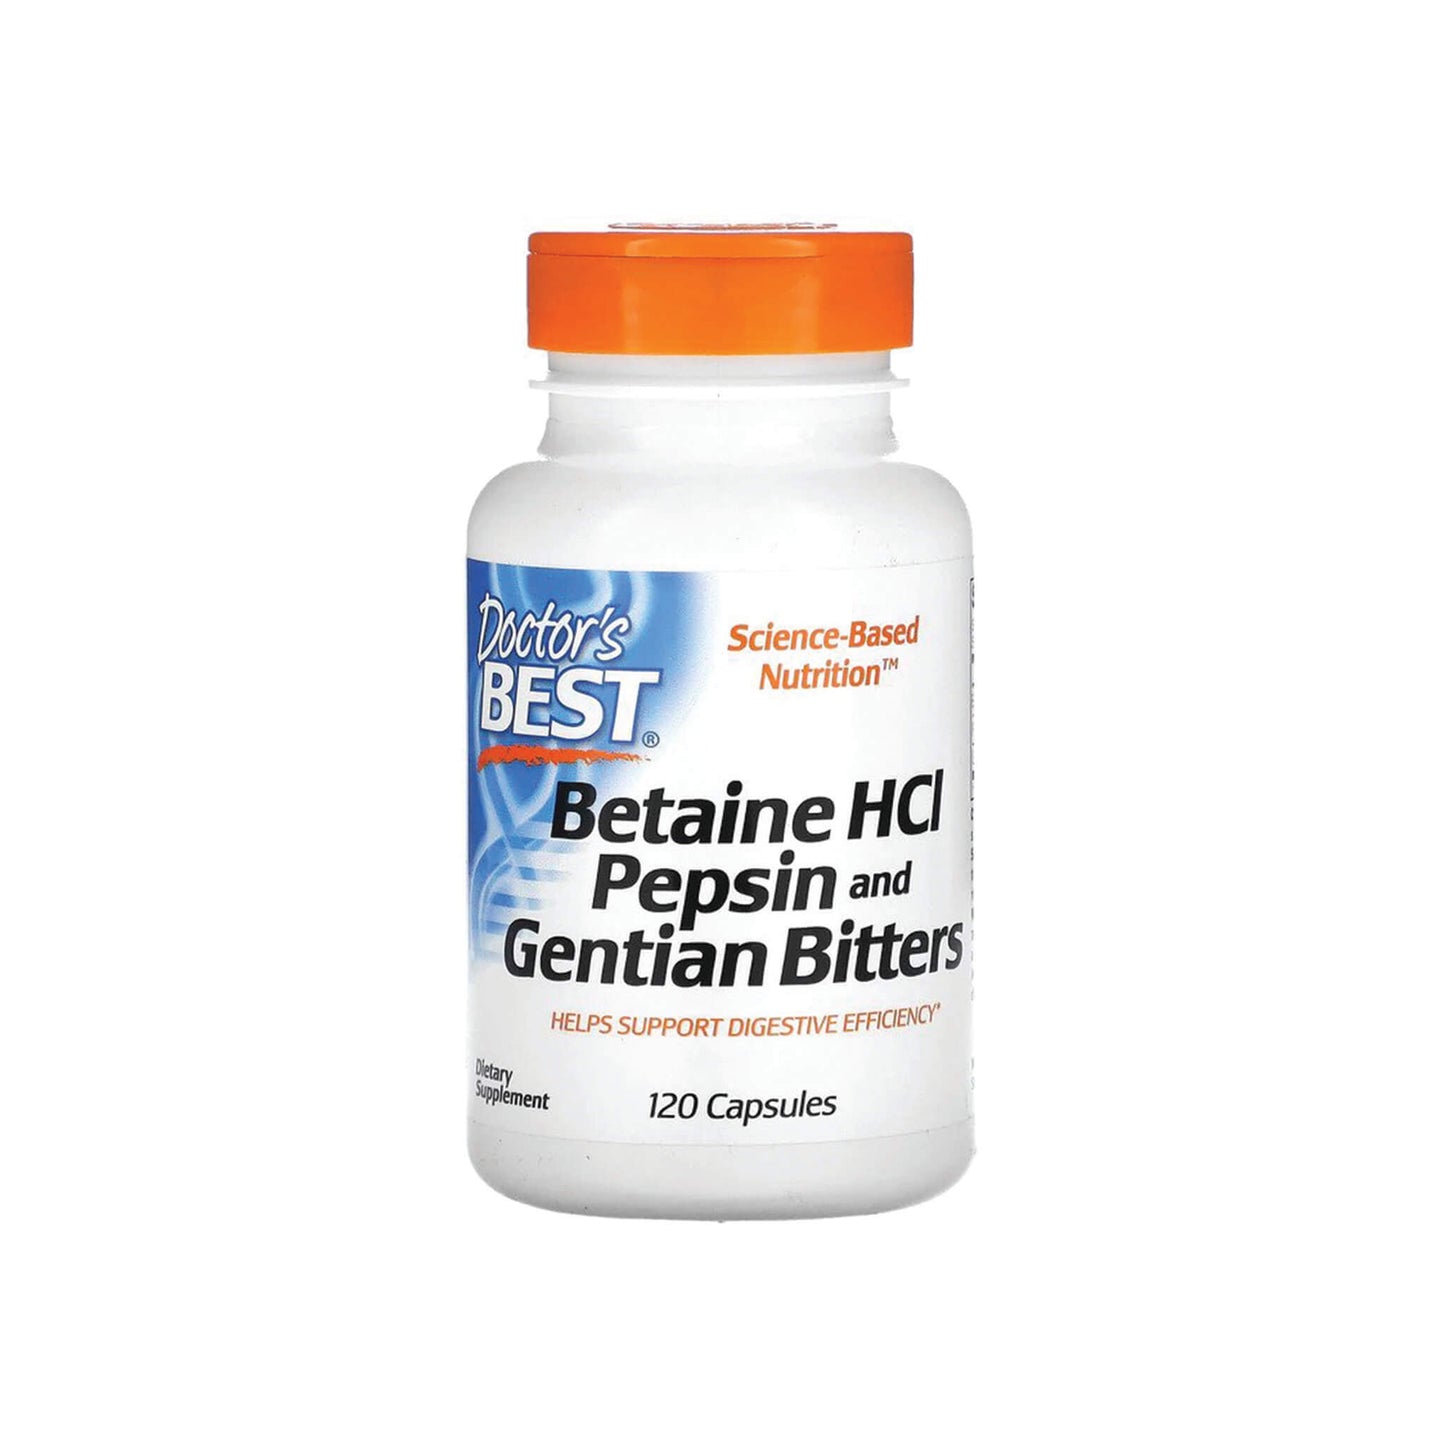 Doctor's Best, Betaine HCL Pepsin & Gentian Bitters - 120 Capsules